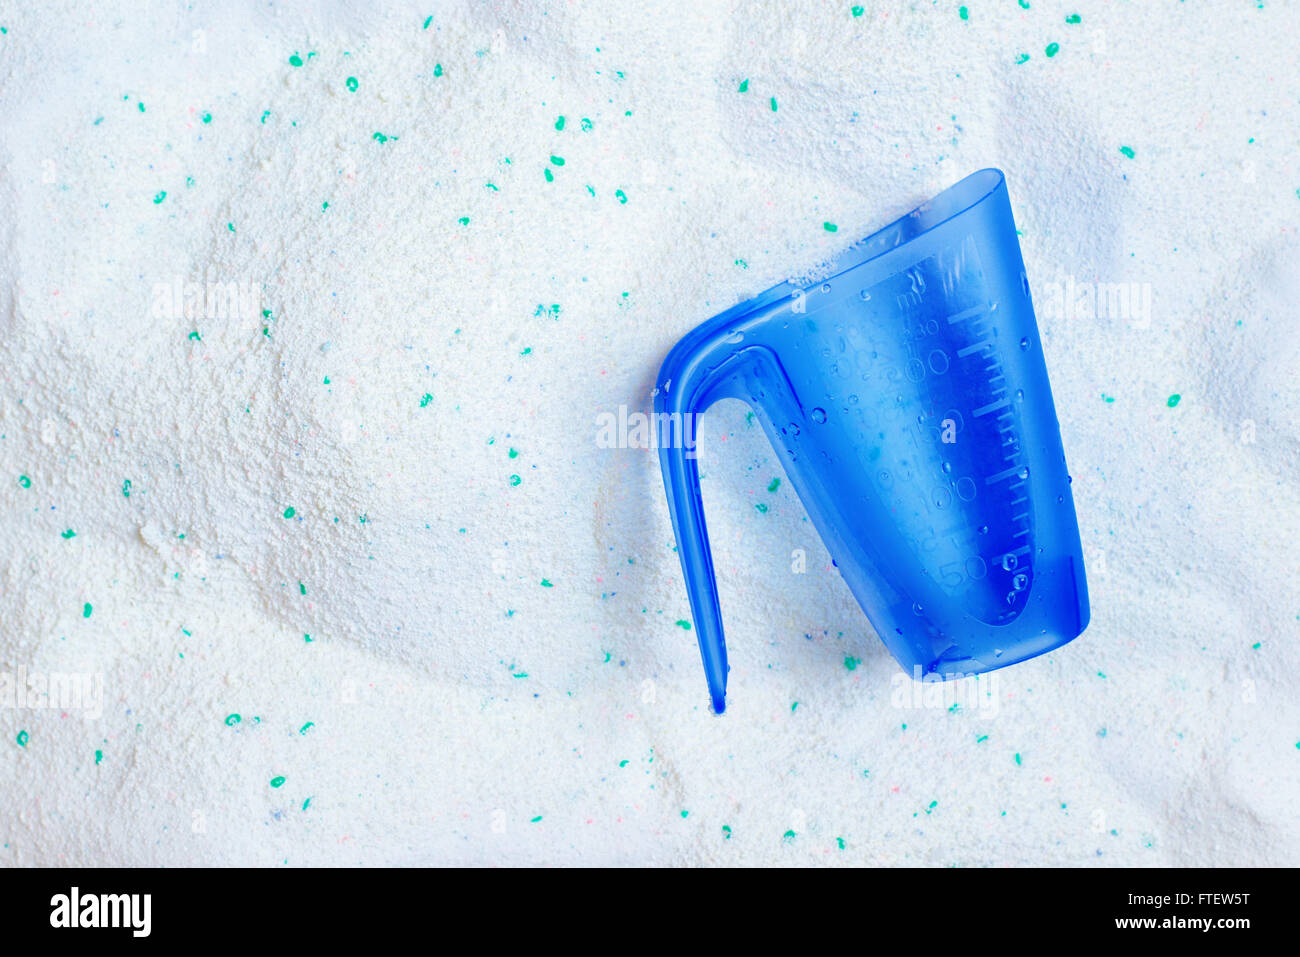 https://c8.alamy.com/comp/FTEW5T/washing-laundry-detergent-powder-and-blue-plastic-measuring-cup-top-FTEW5T.jpg